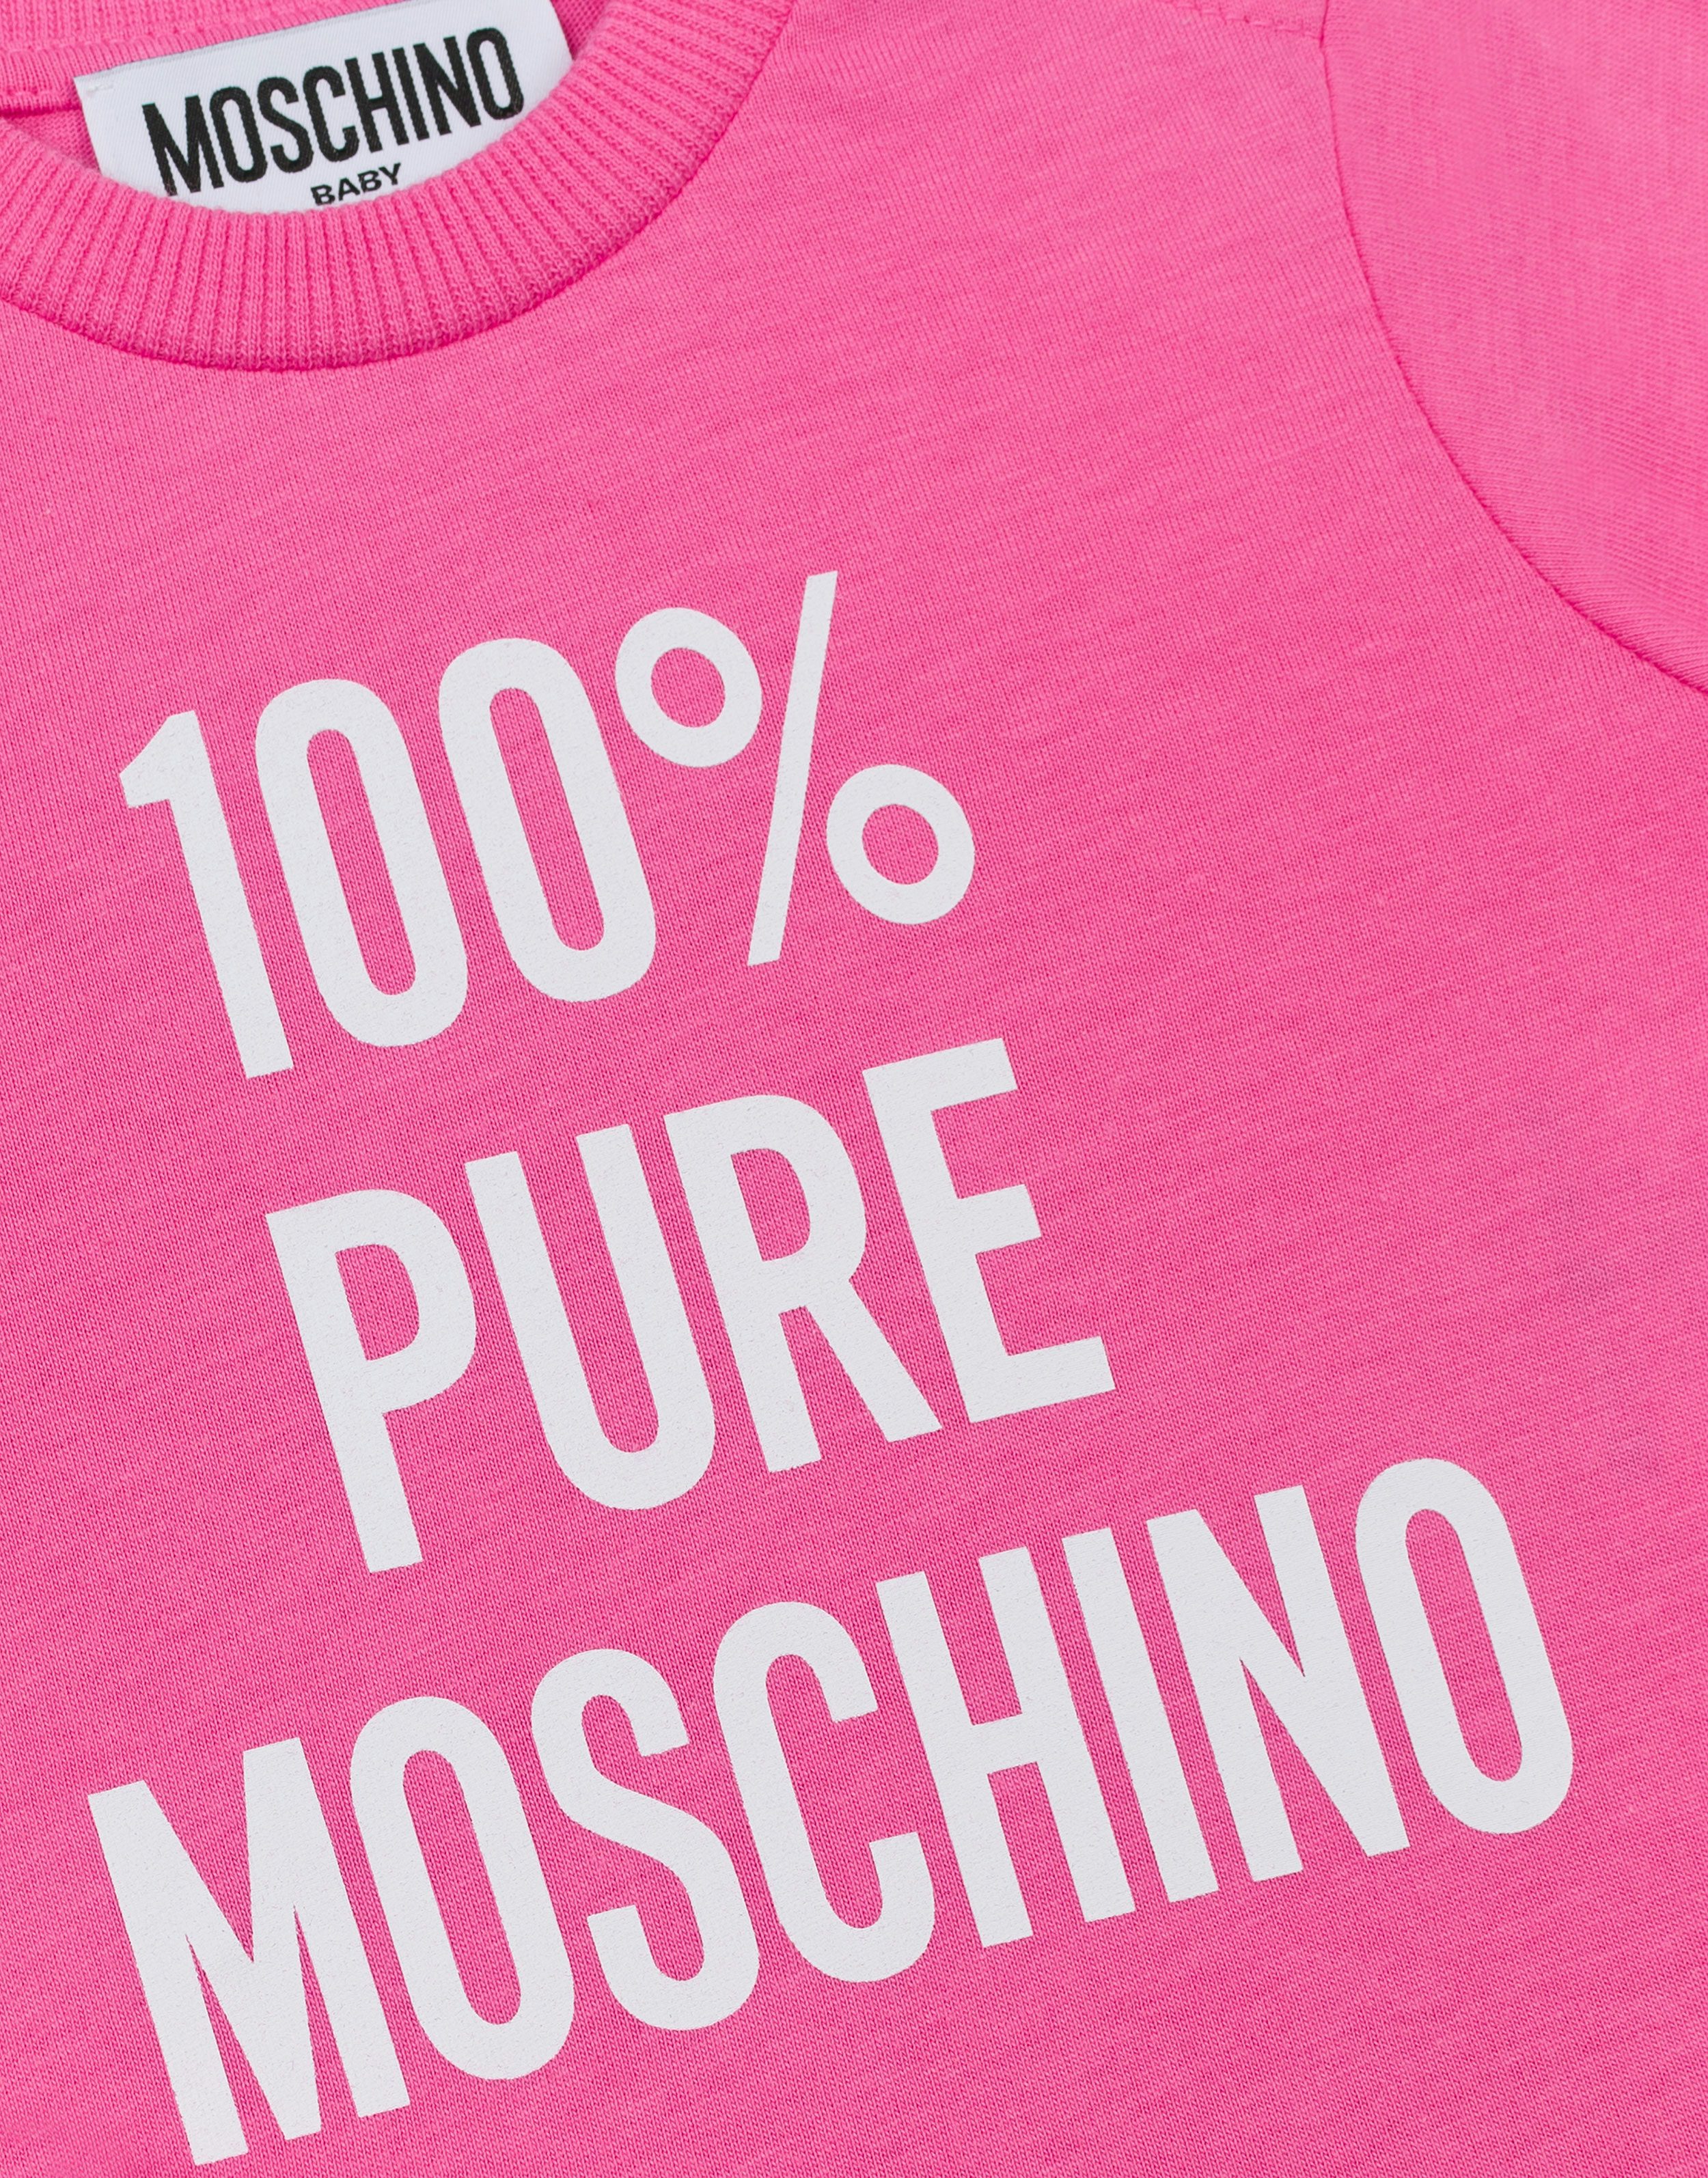 T-shirt in jersey 100% Pure Moschino 1